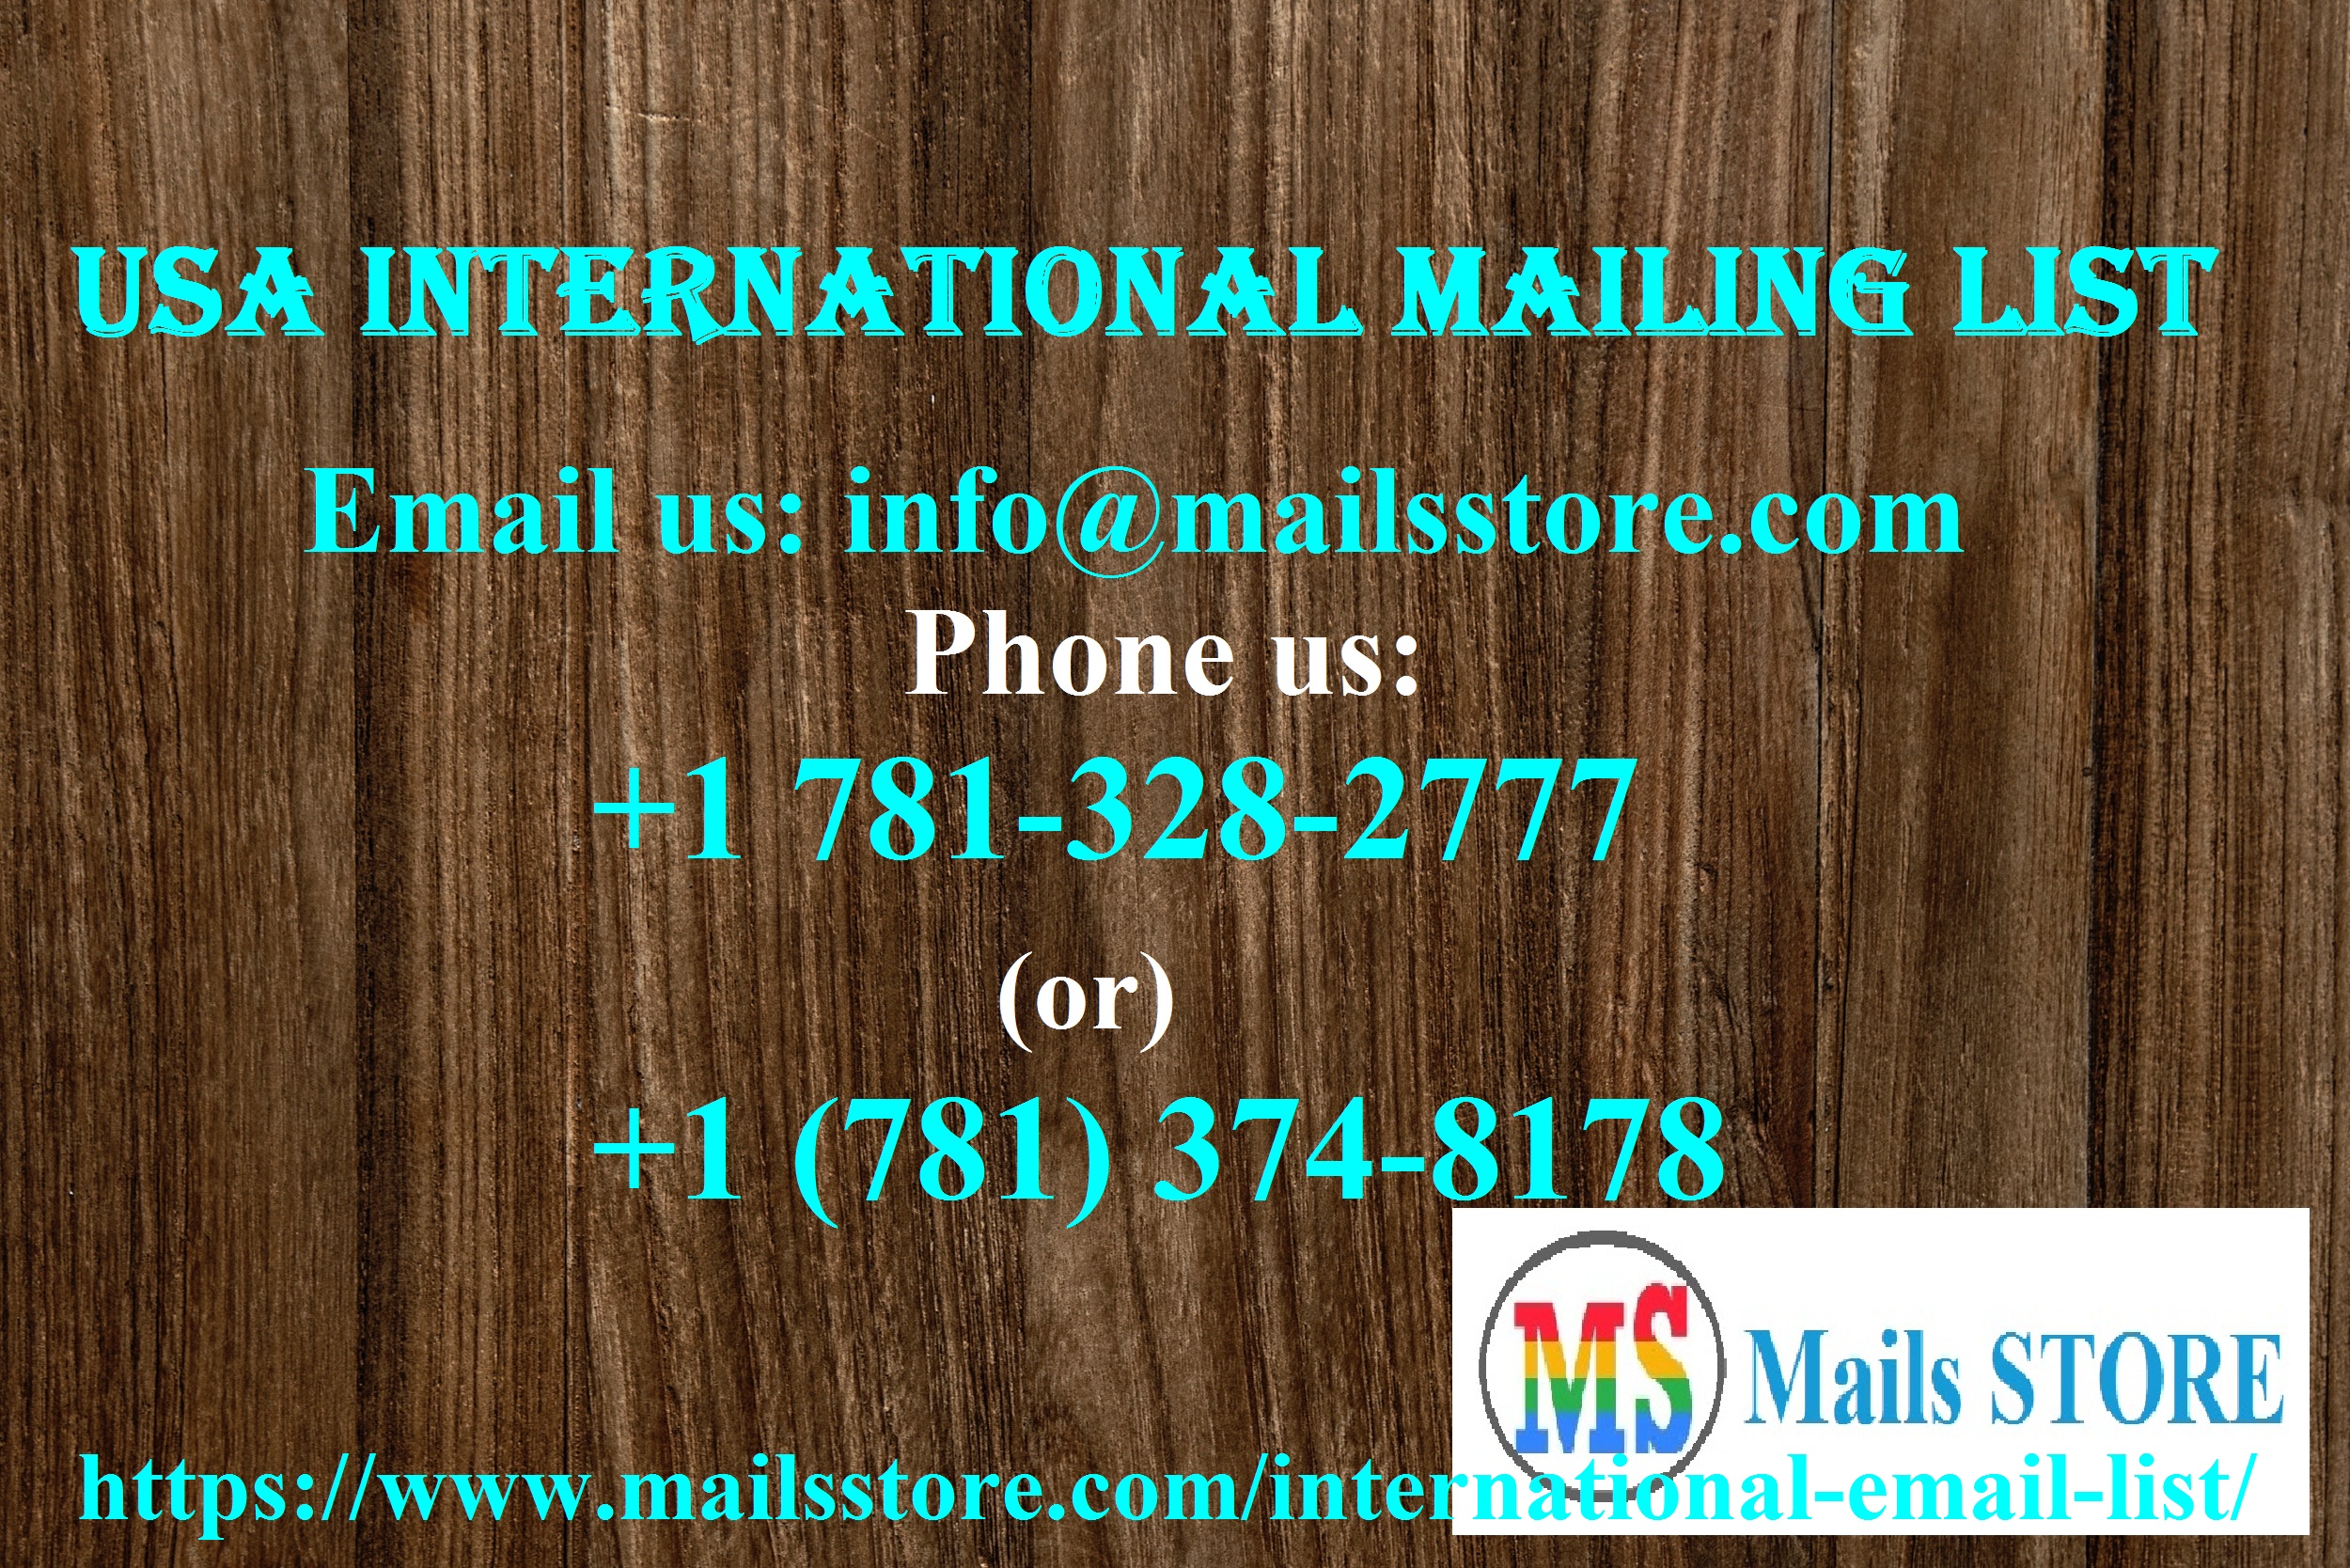 Industry Wise Email Lists | Industry Wise Mailing Lists | Mails STORE, Hampshire, Massachusetts, United States